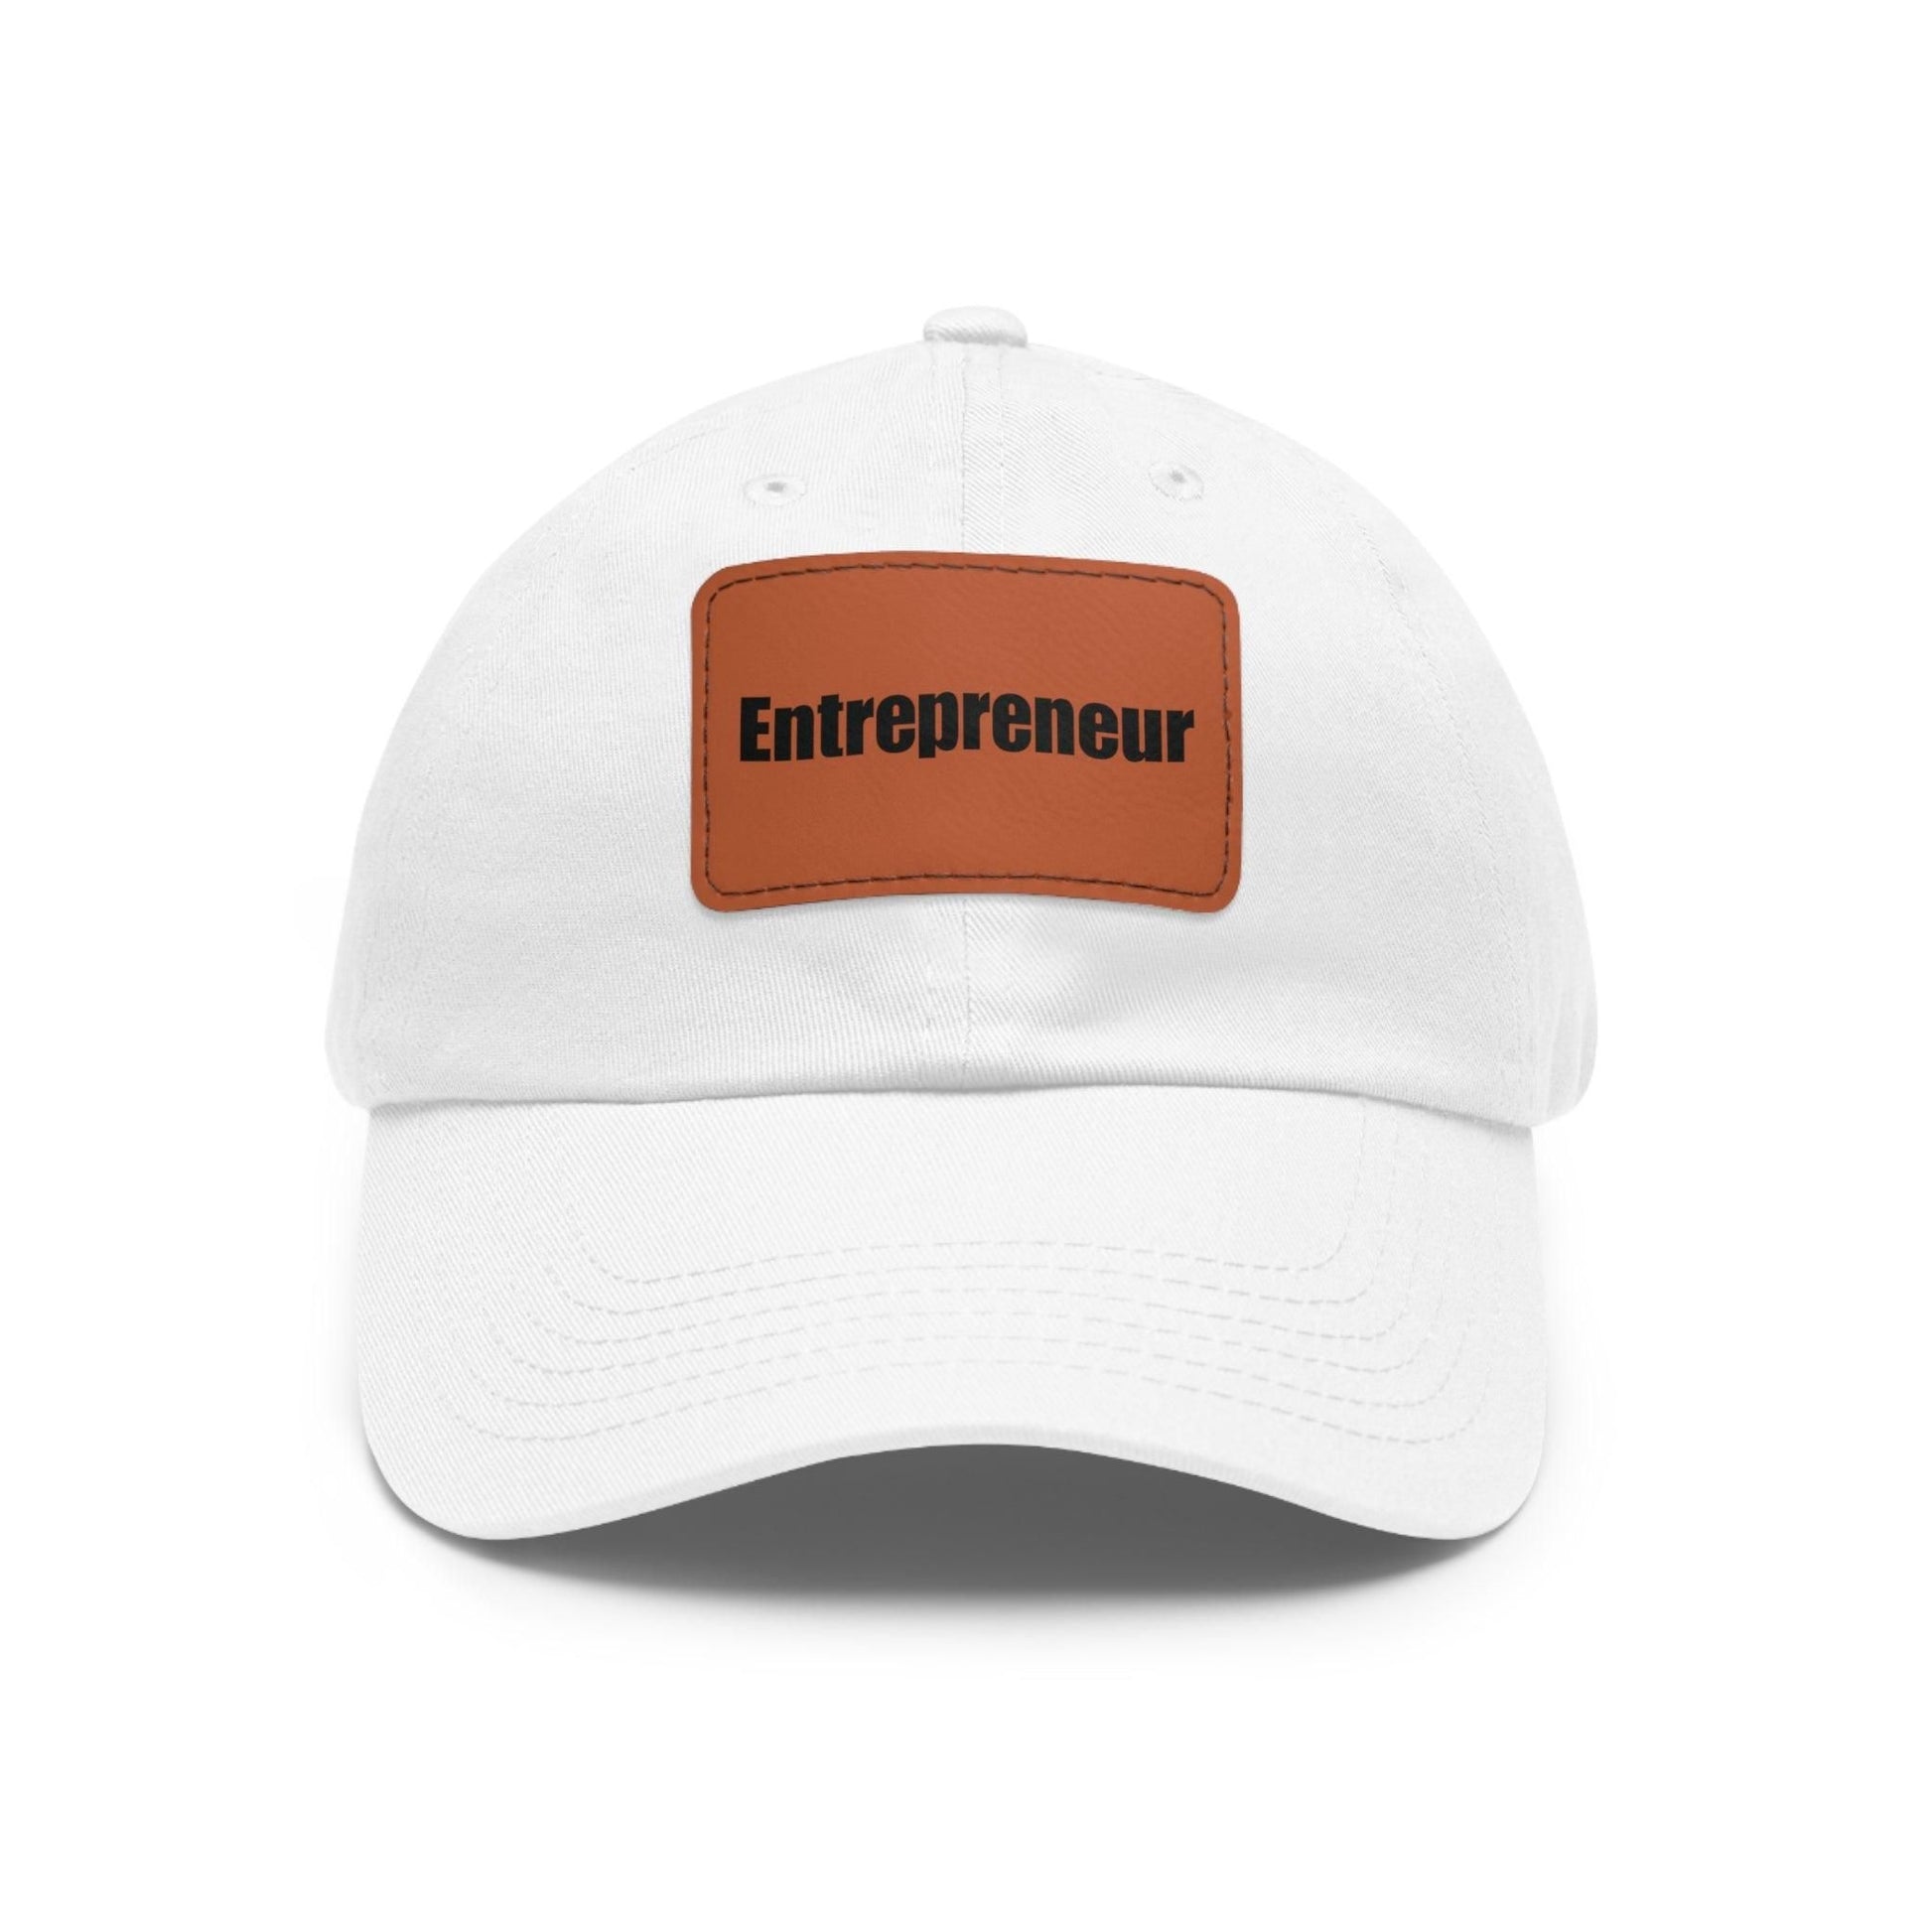 Entrepreneur Baseball Hat with Leather Patch Cap White / Light Brown patch Rectangle One size